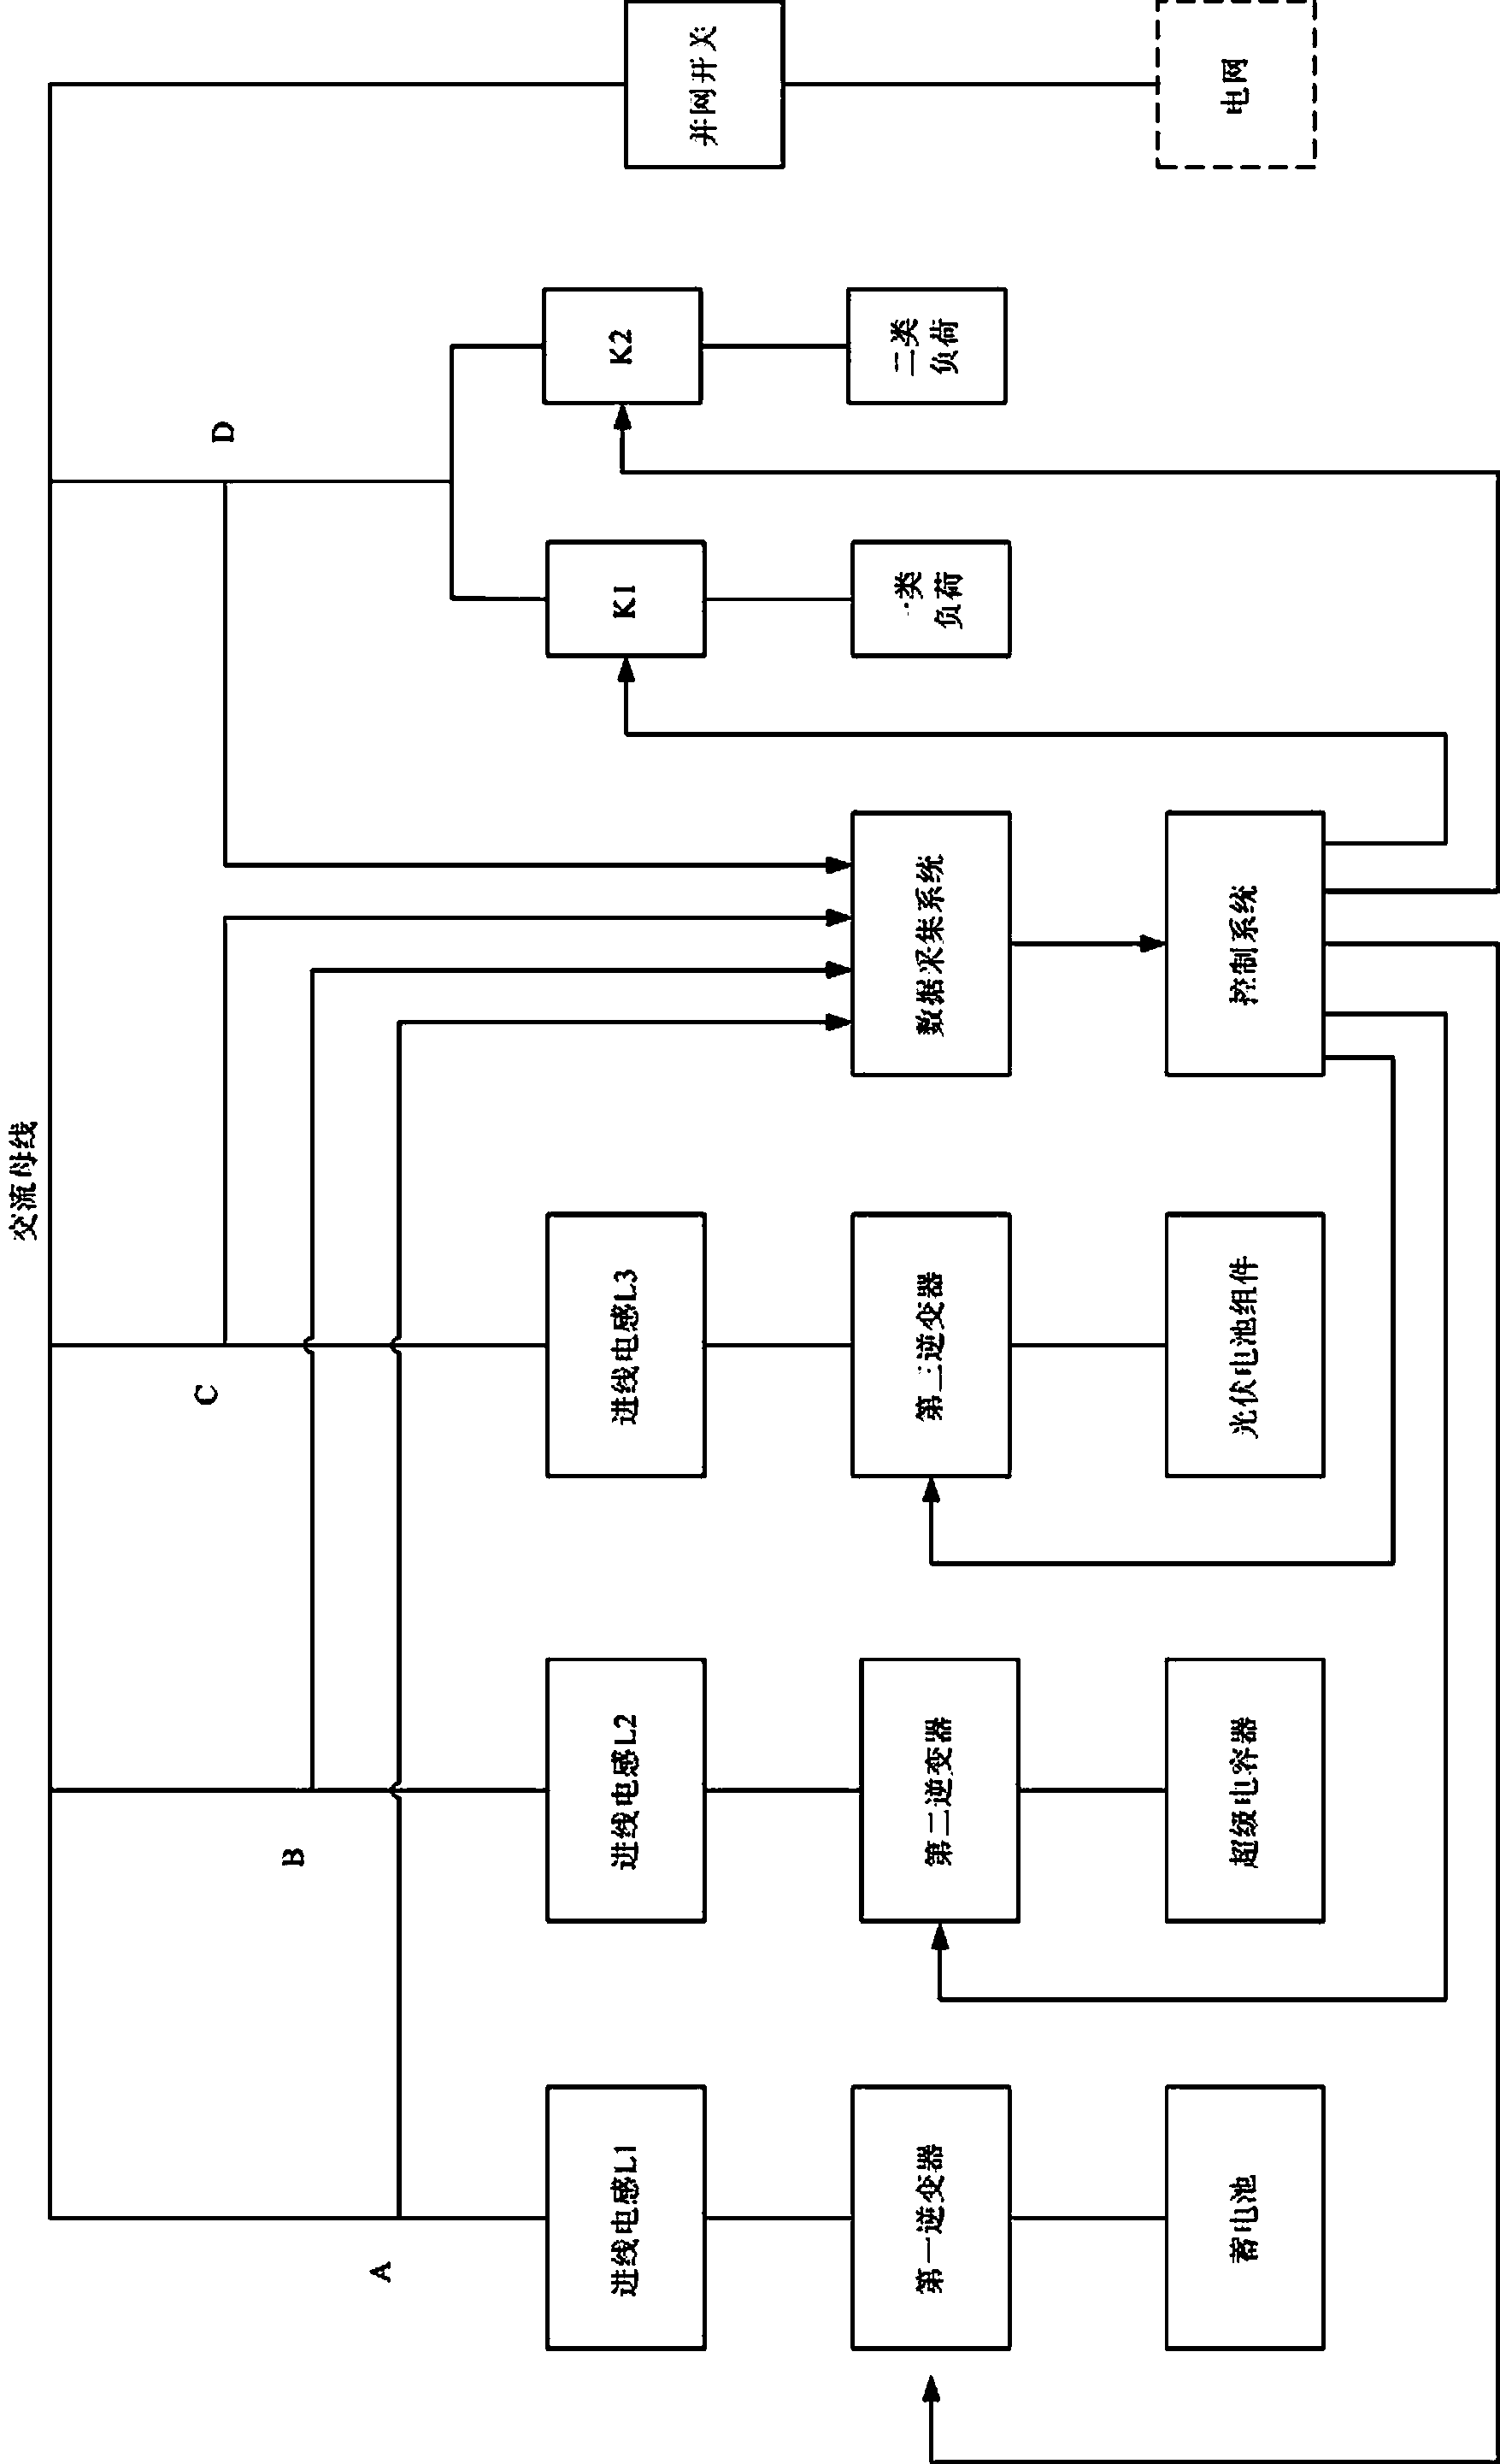 Off-grid control method of micro-grid energy storage device based on power prediction